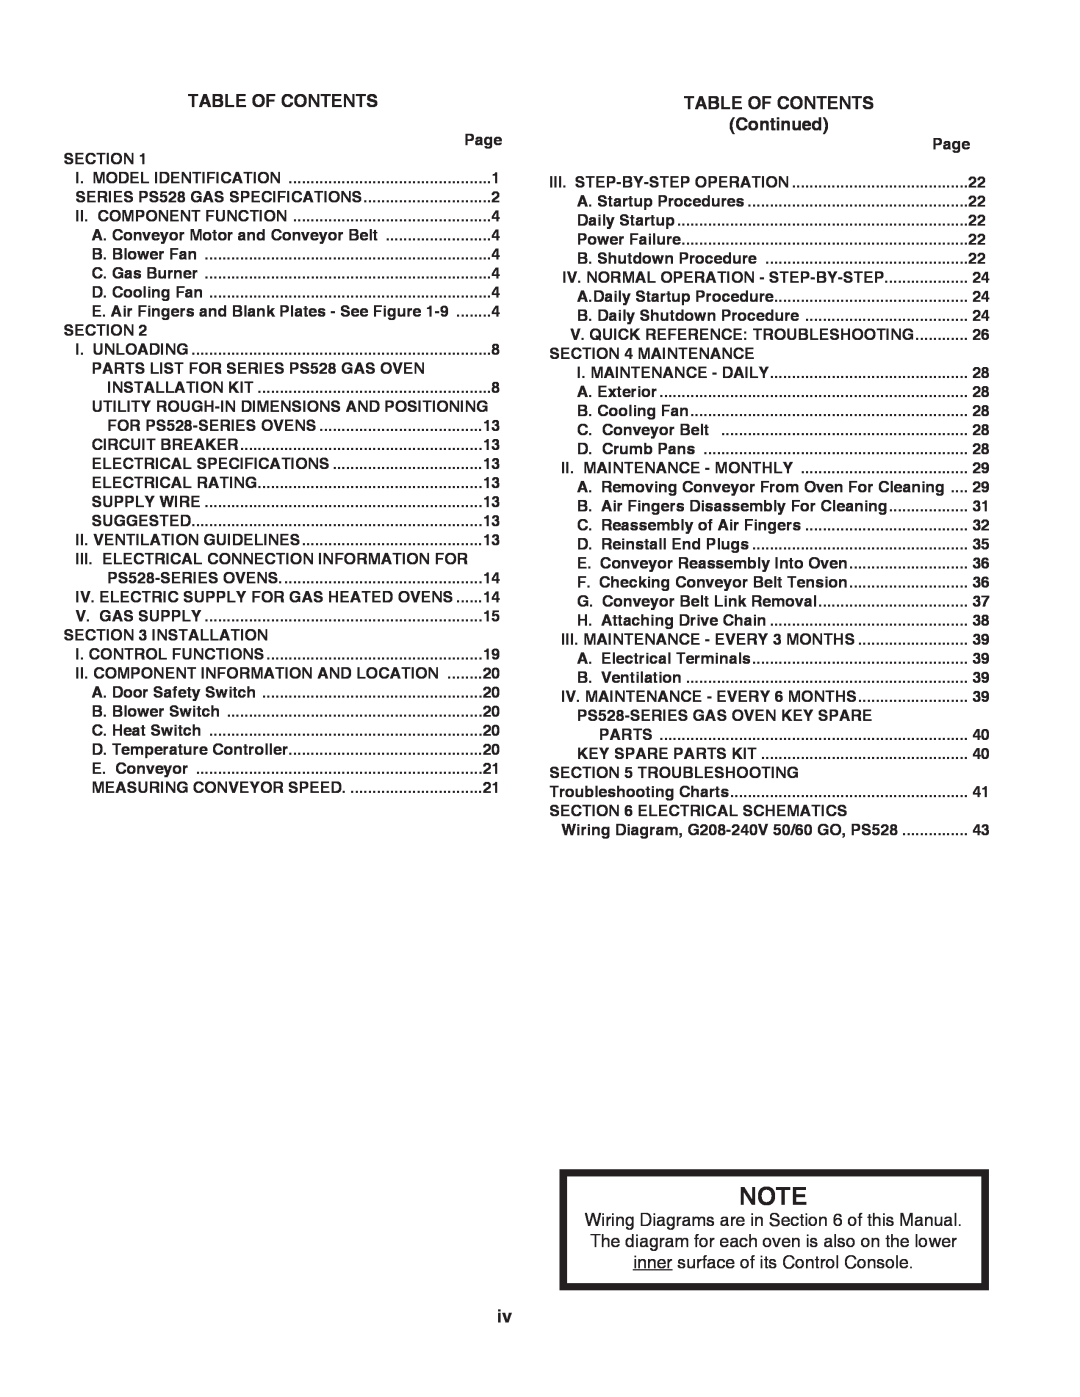 Middleby Marshall PS528G installation manual Table Of Contents, Continued 